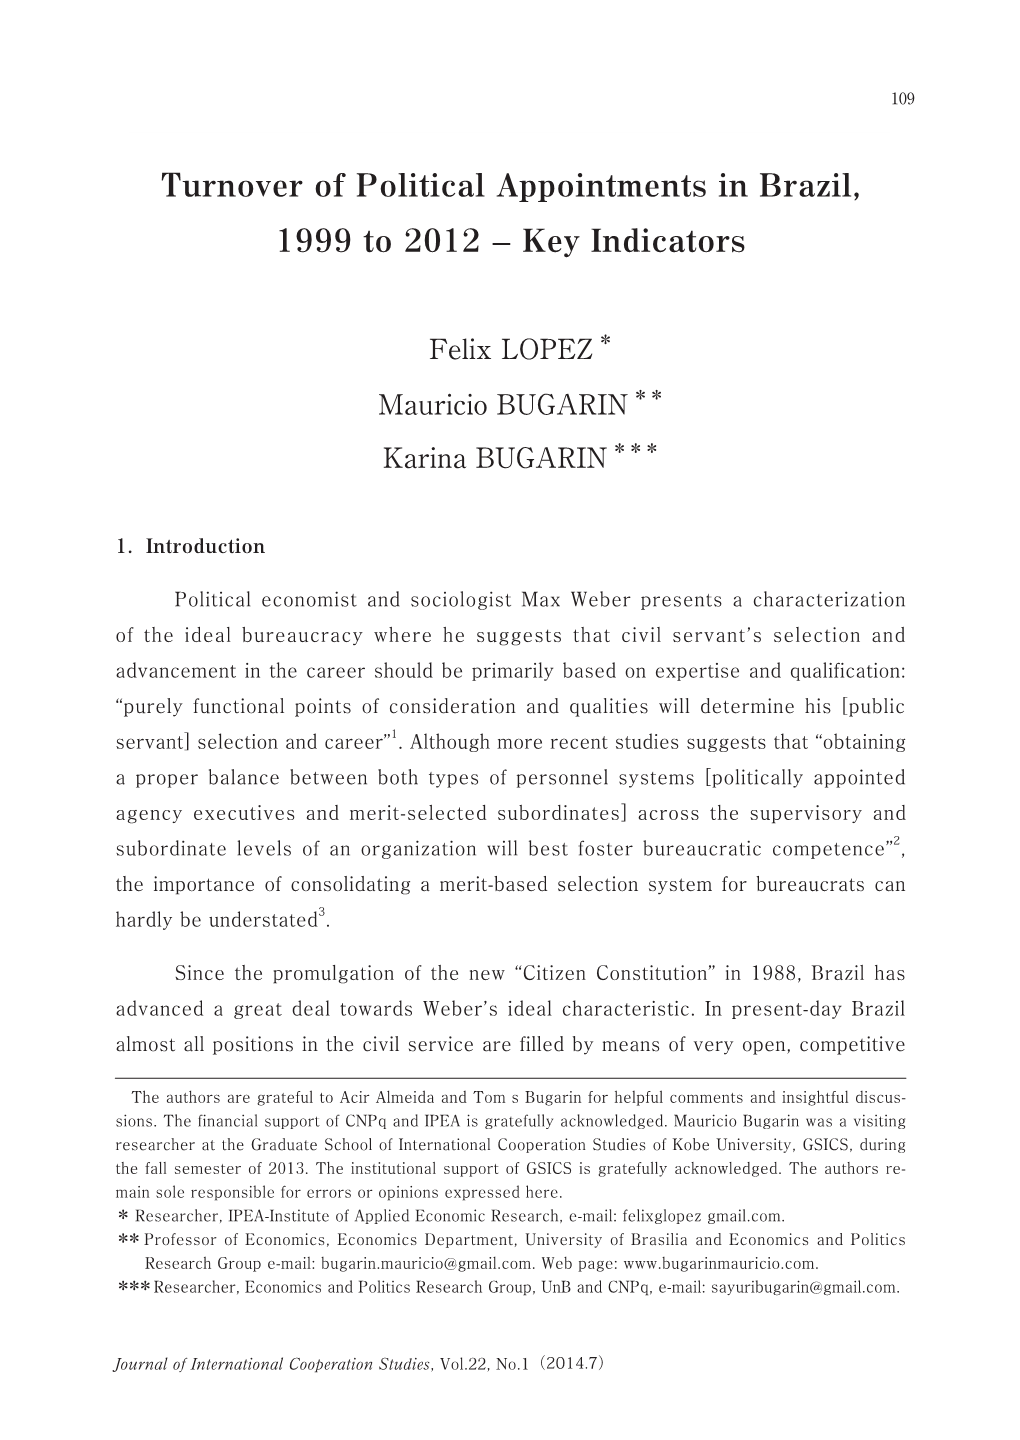 Turnover of Political Appointments in Brazil, 1999 to 2012 – Key Indicators 109